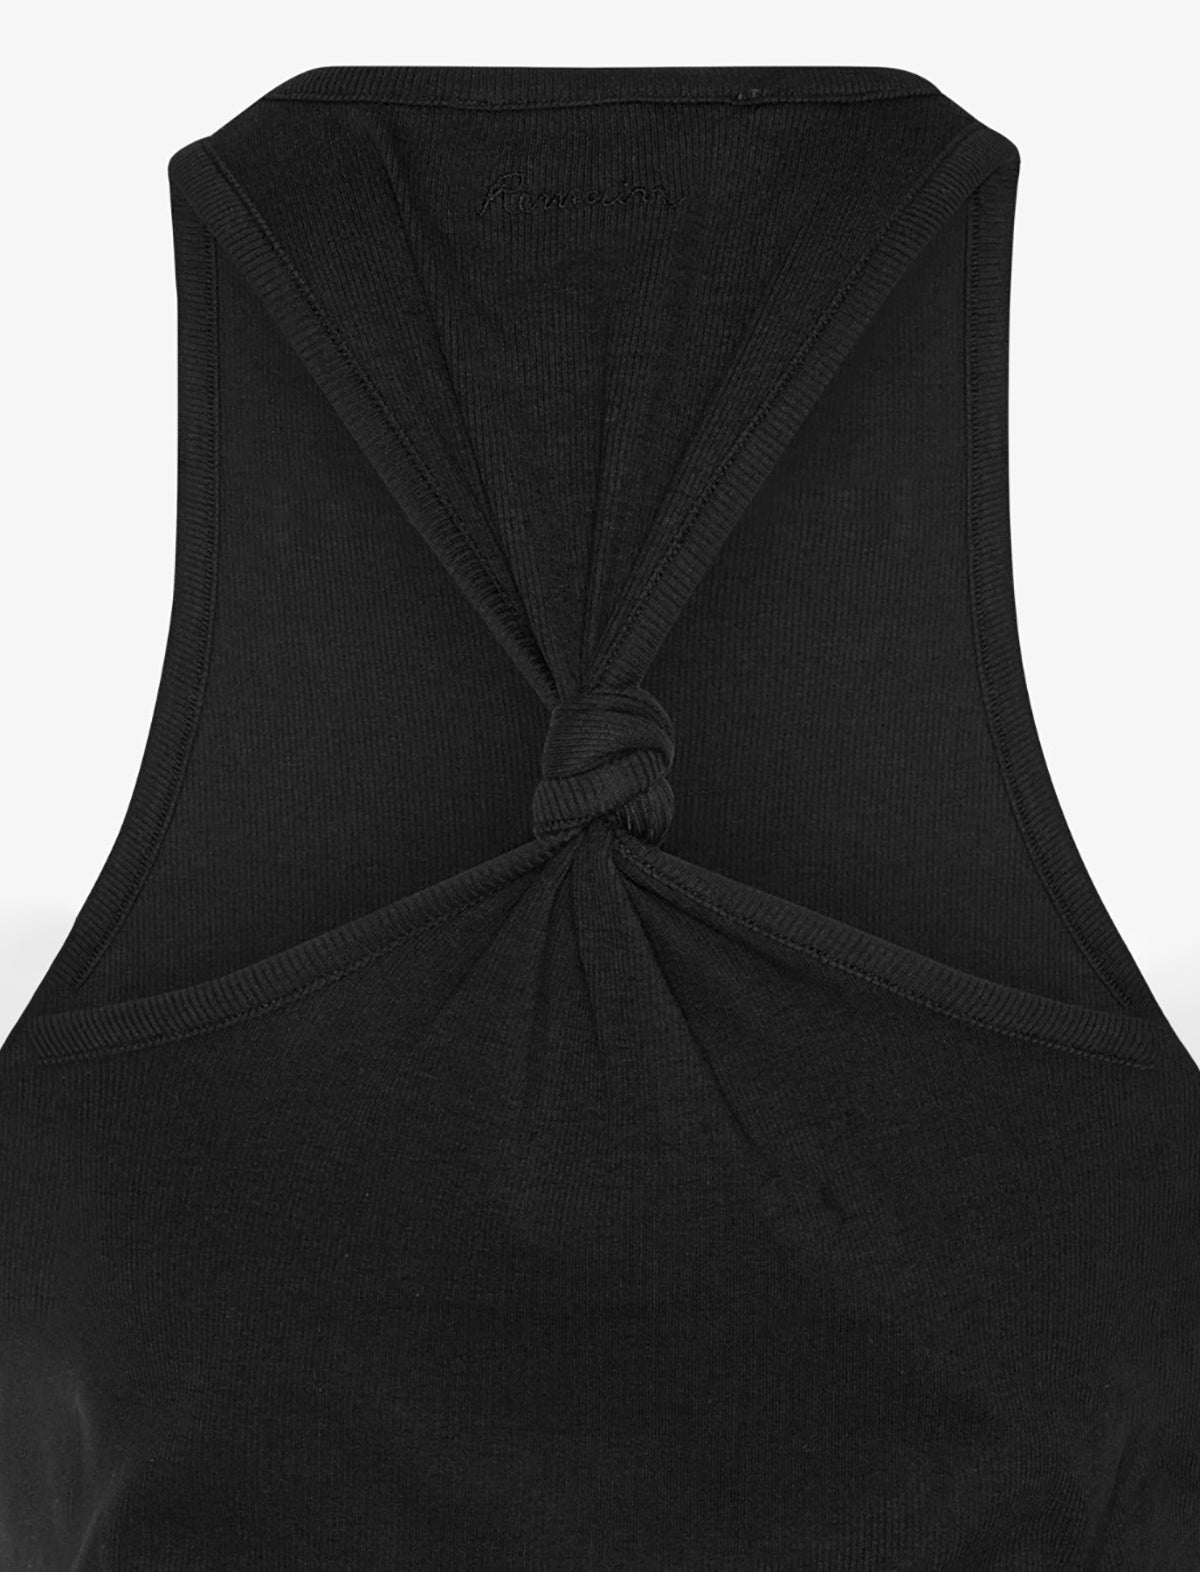 REMAIN Knotted Back Rib Top in Black